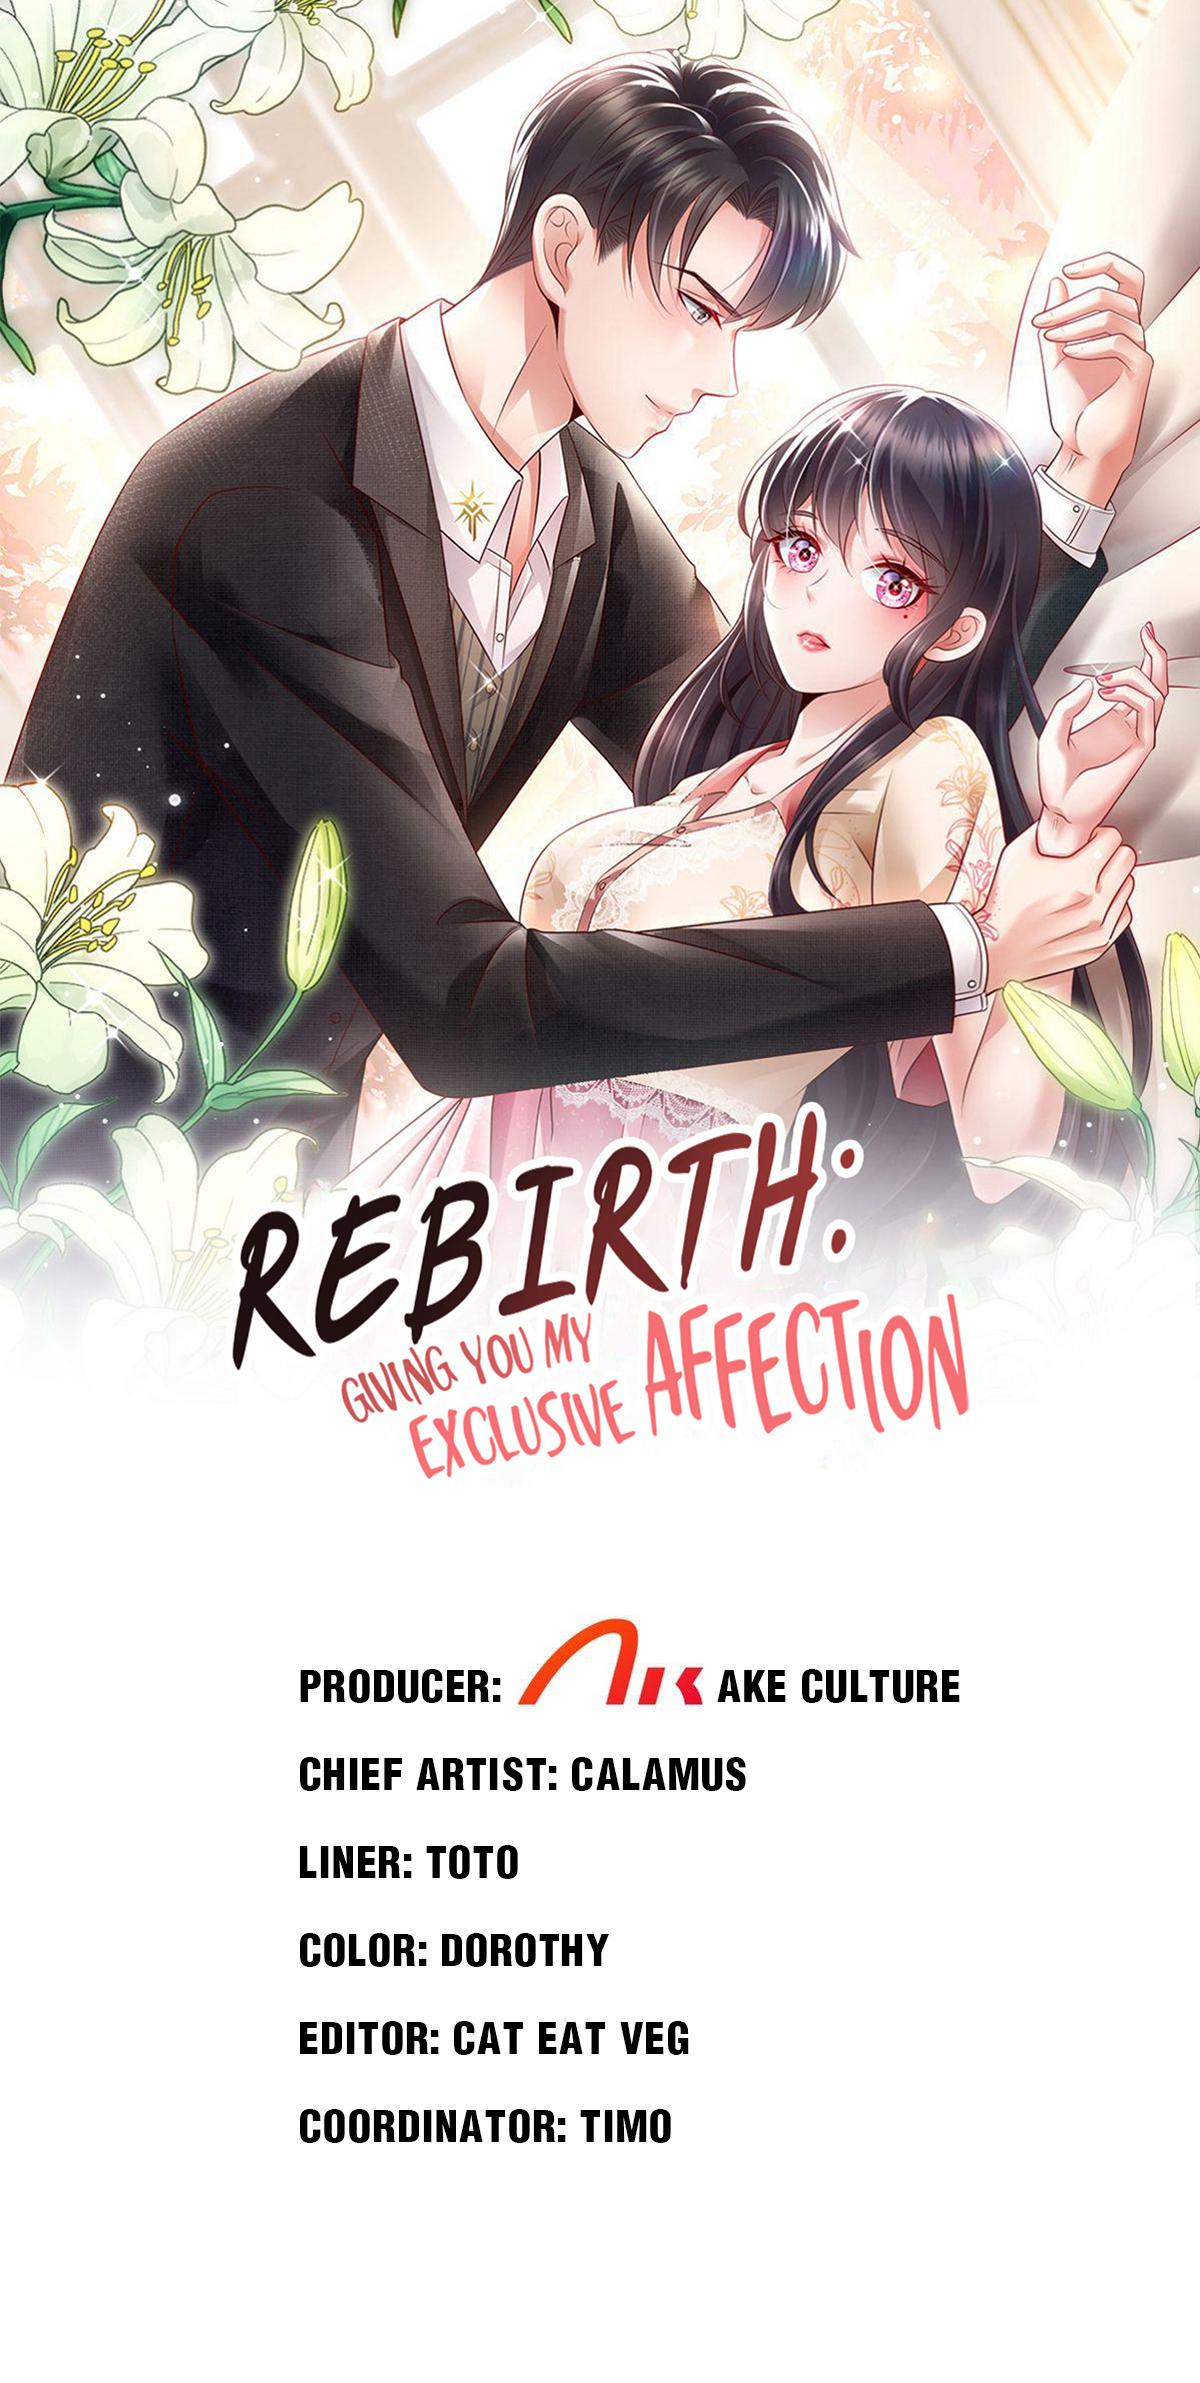 Rebirth: Giving You My Exclusive Affection 225